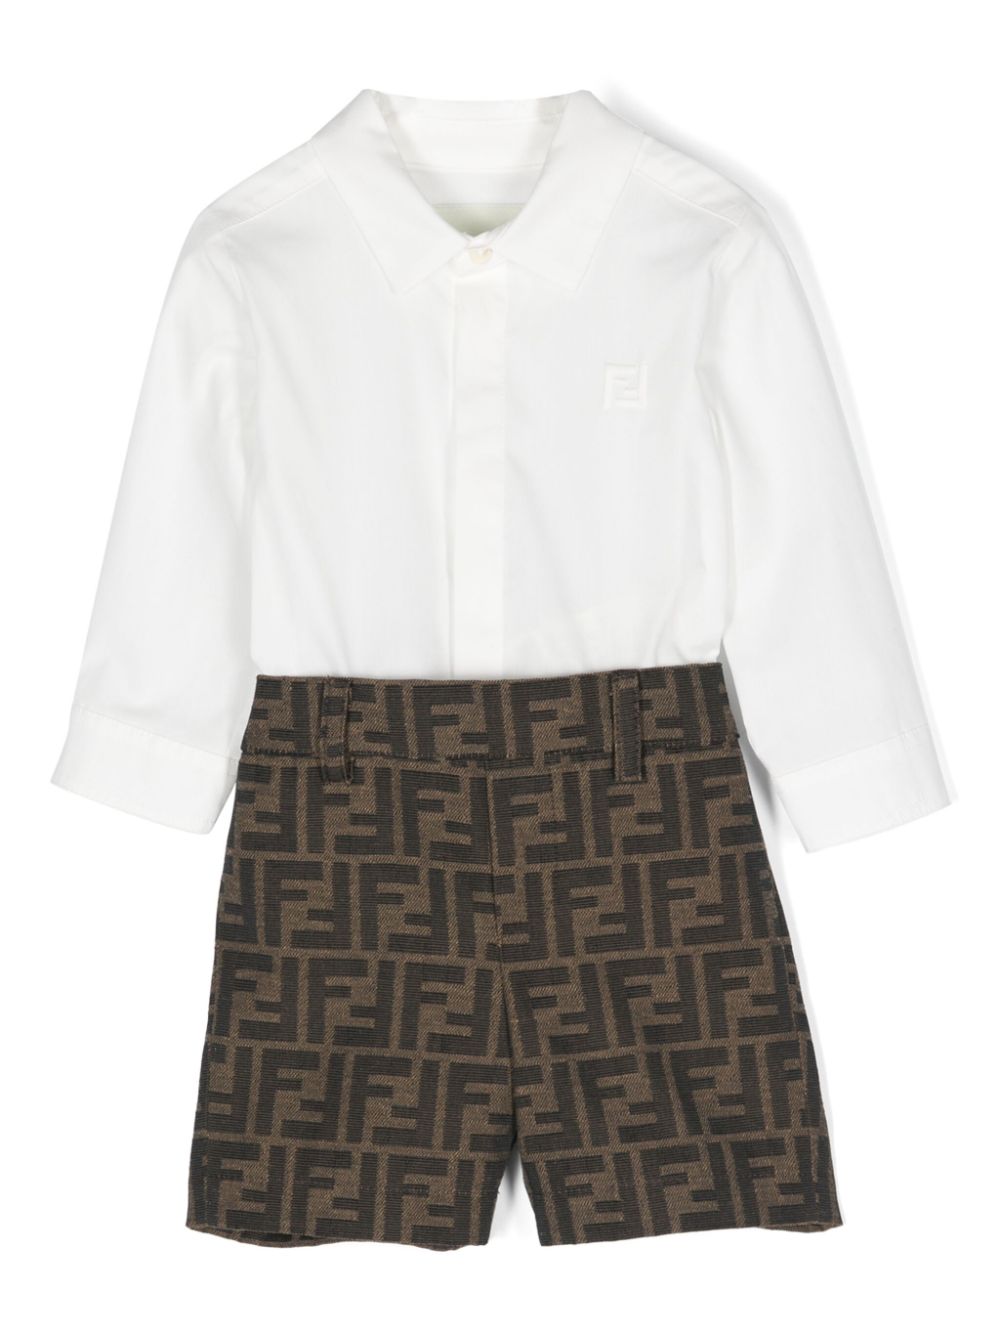 Elegant white and brown outfit for newborns